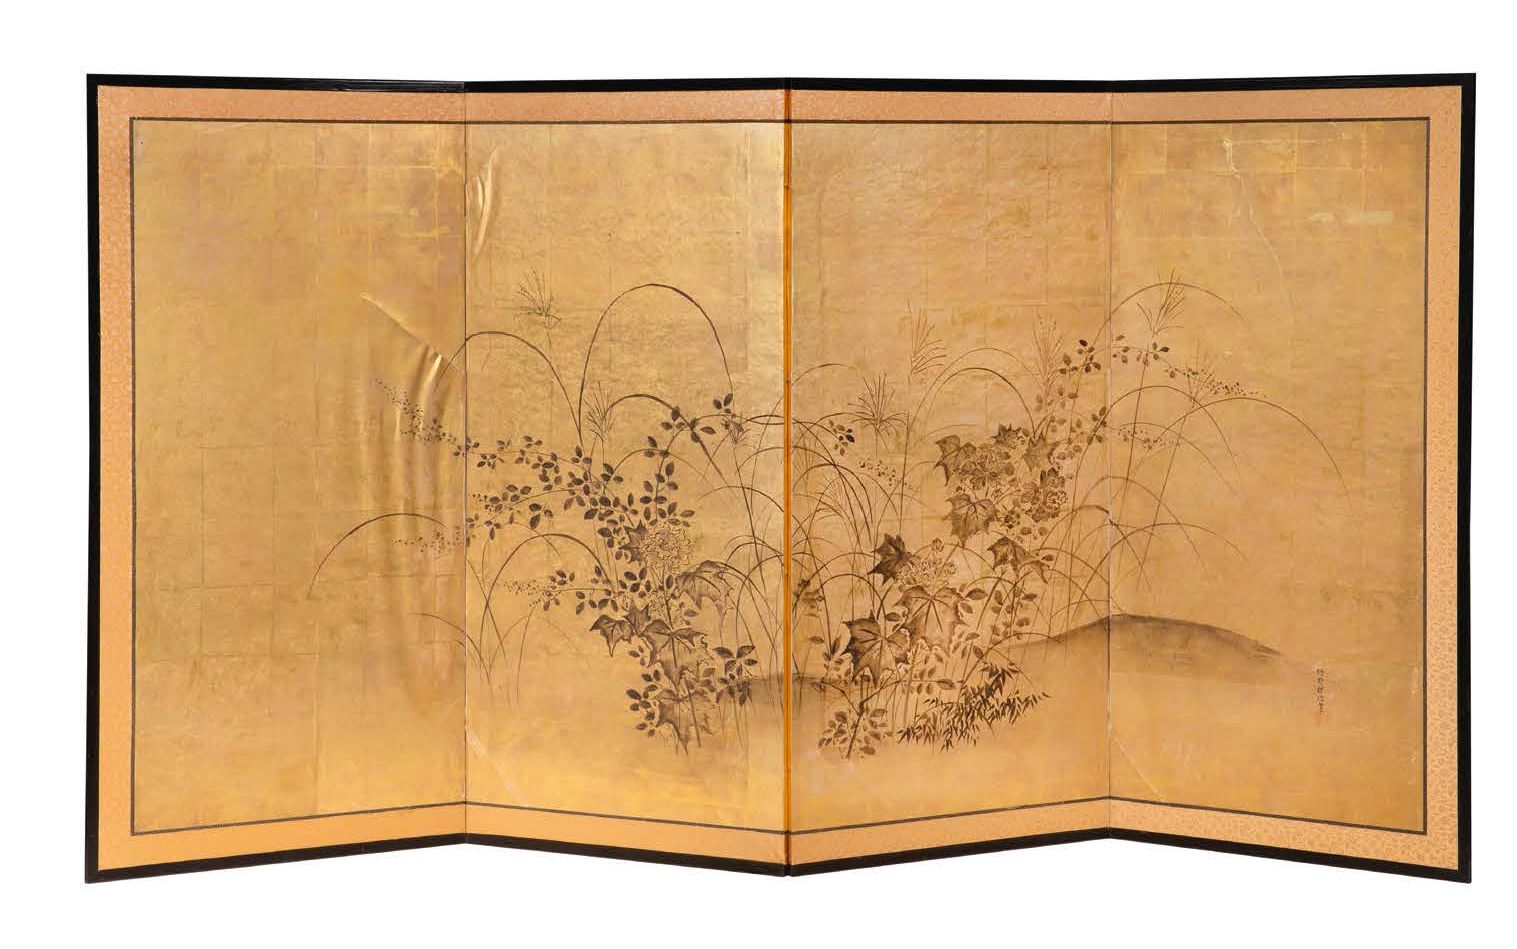 JAPON XIXE SIECLE Four-leaf screen painted in ink and light colours on a gold ba&hellip;